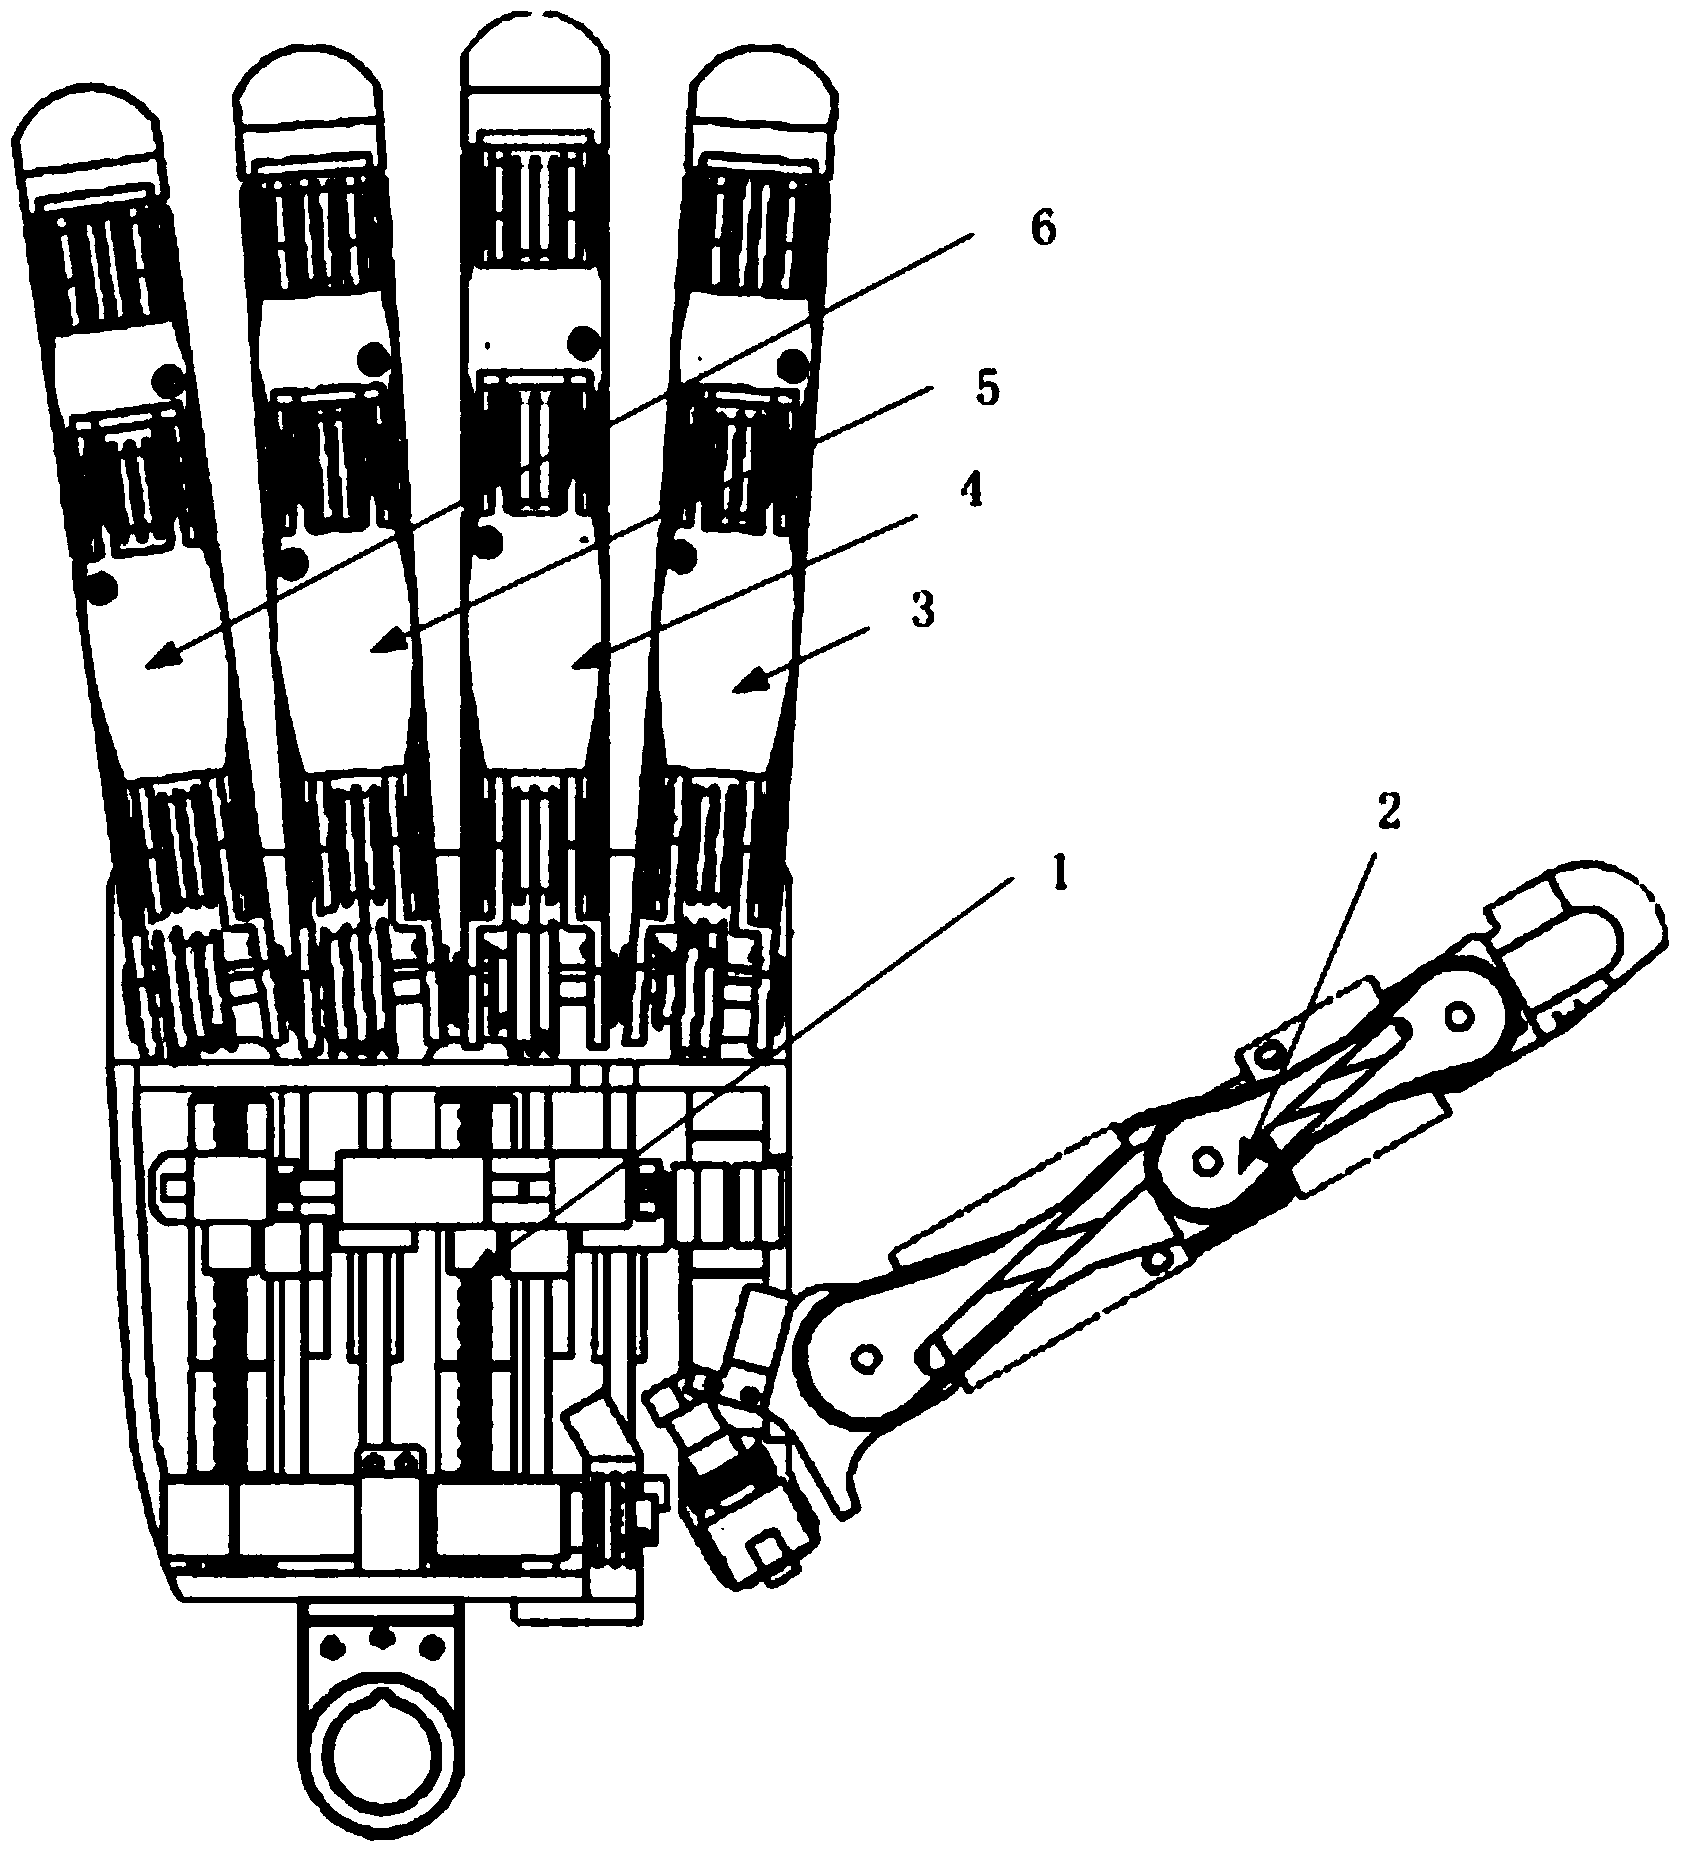 Under-actuated prosthetic hand capable of reproducing hand grasping function